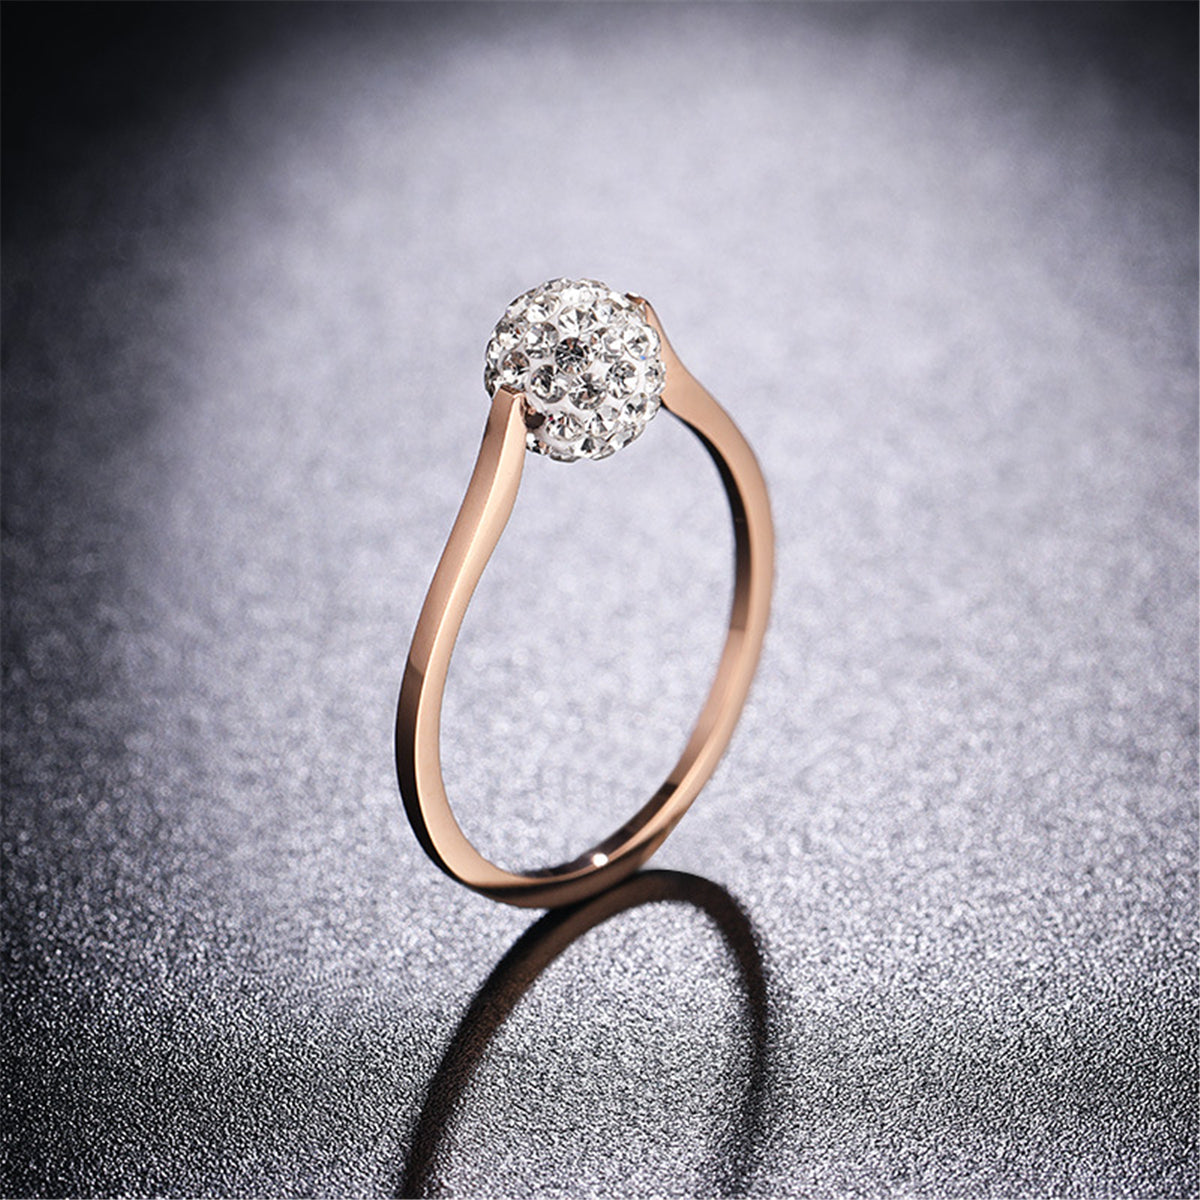 Cubic Zirconia & 18K Rose Gold-Plated Ball Ring